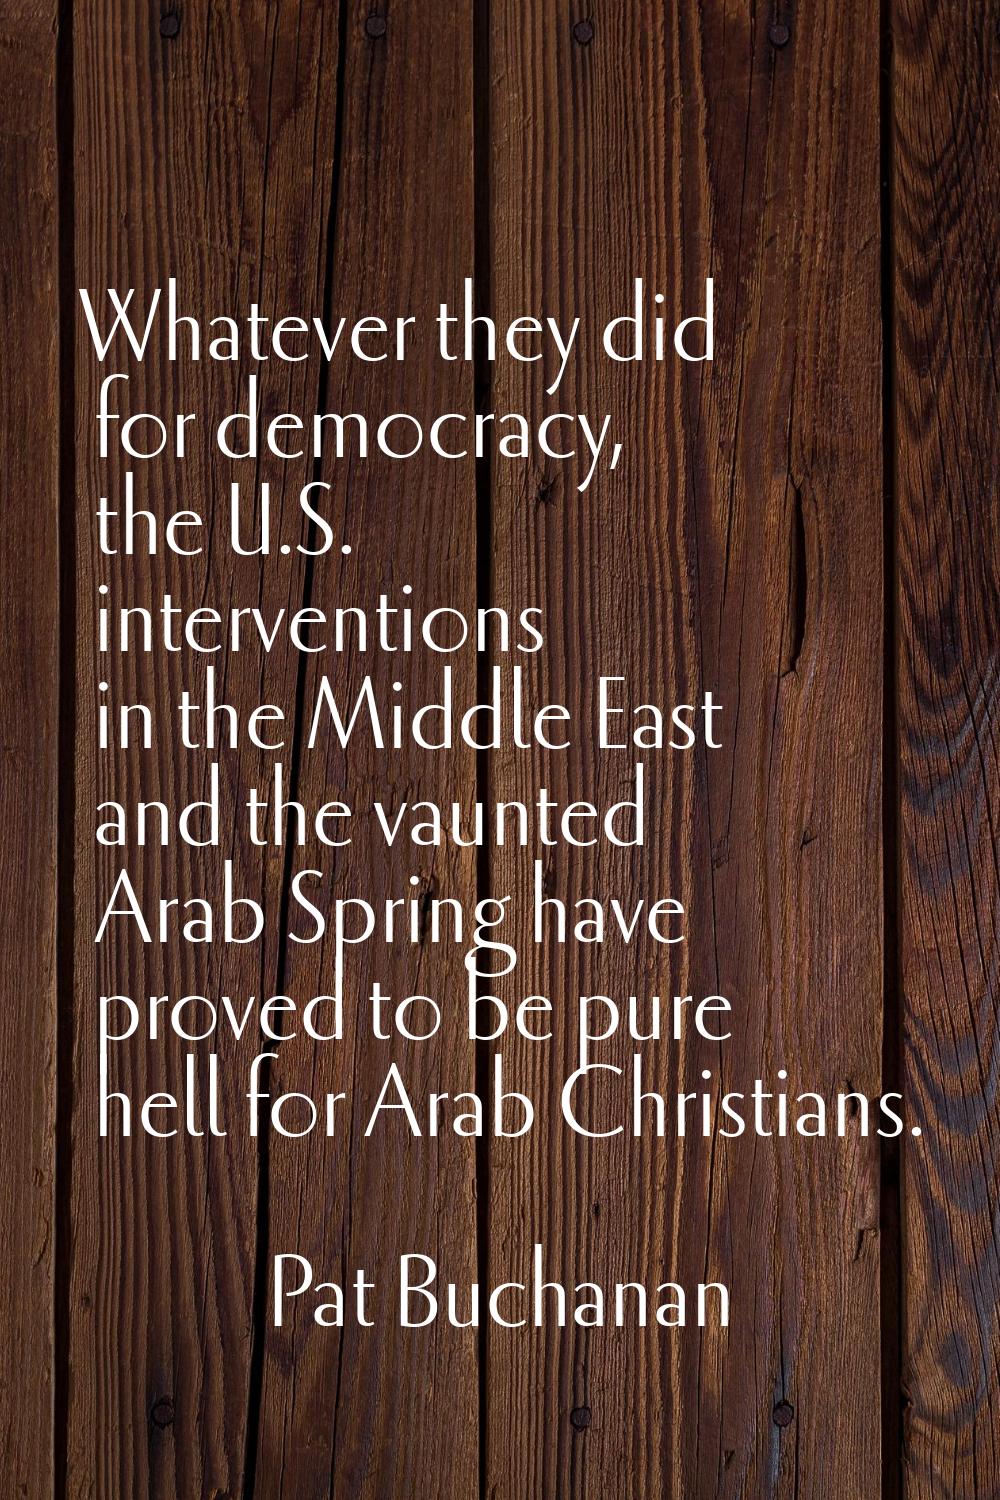 Whatever they did for democracy, the U.S. interventions in the Middle East and the vaunted Arab Spr